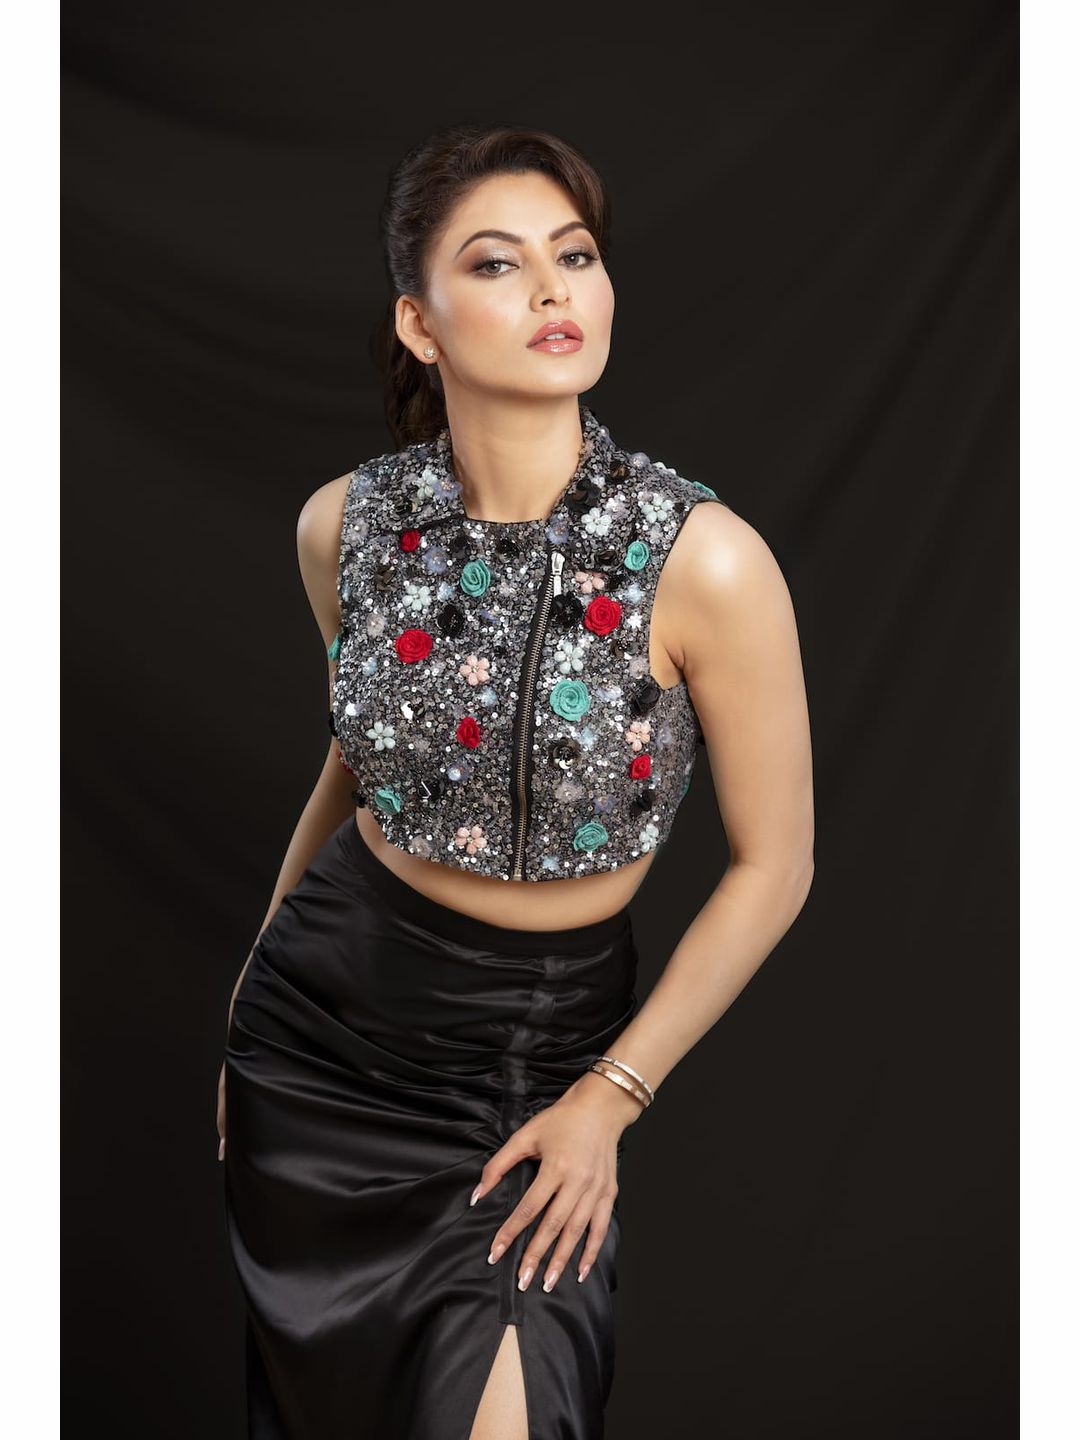 The Freya Western Dresses for Women - Reema Anand Label